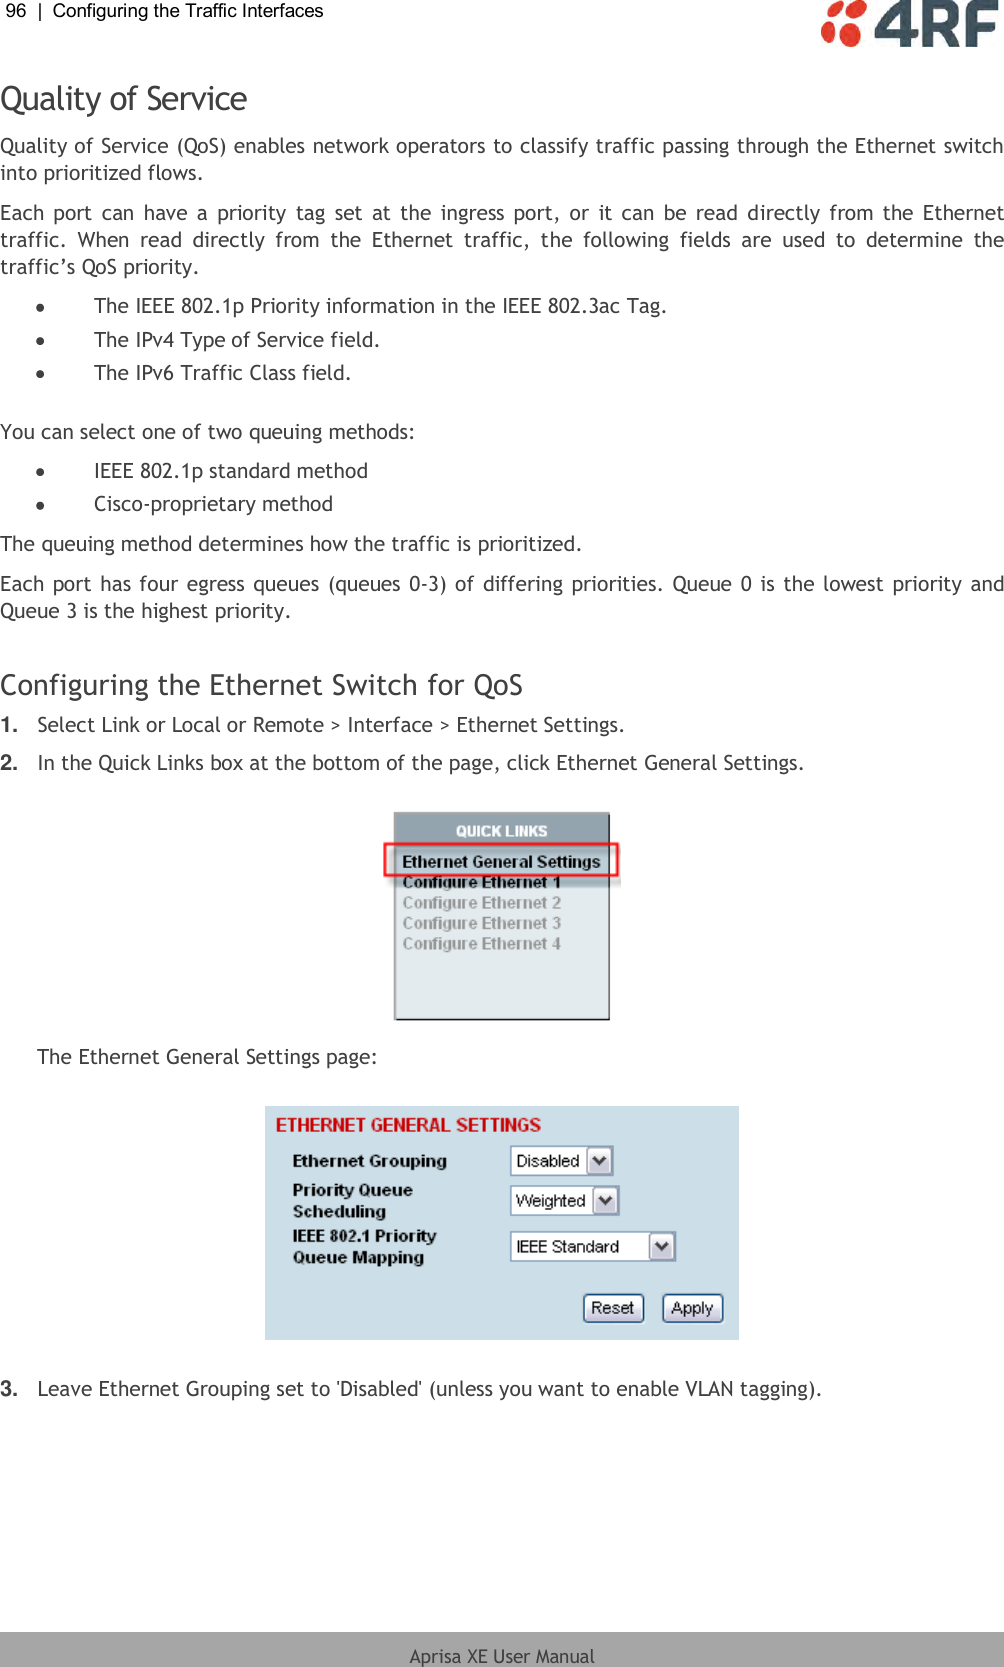 96  |  Configuring the Traffic Interfaces   Aprisa XE User Manual  Quality of Service Quality of Service (QoS) enables network operators to classify traffic passing through the Ethernet switch into prioritized flows. Each  port can have  a  priority  tag  set  at the ingress port, or  it can  be  read  directly from  the Ethernet traffic.  When  read  directly  from  the  Ethernet  traffic,  the  following  fields  are  used  to  determine  the traffic’s QoS priority.   The IEEE 802.1p Priority information in the IEEE 802.3ac Tag.  The IPv4 Type of Service field.  The IPv6 Traffic Class field.  You can select one of two queuing methods:  IEEE 802.1p standard method  Cisco-proprietary method The queuing method determines how the traffic is prioritized. Each port has four egress queues (queues 0-3) of differing priorities. Queue 0 is the lowest priority and Queue 3 is the highest priority.  Configuring the Ethernet Switch for QoS 1. Select Link or Local or Remote &gt; Interface &gt; Ethernet Settings. 2. In the Quick Links box at the bottom of the page, click Ethernet General Settings.   The Ethernet General Settings page:    3. Leave Ethernet Grouping set to &apos;Disabled&apos; (unless you want to enable VLAN tagging). 